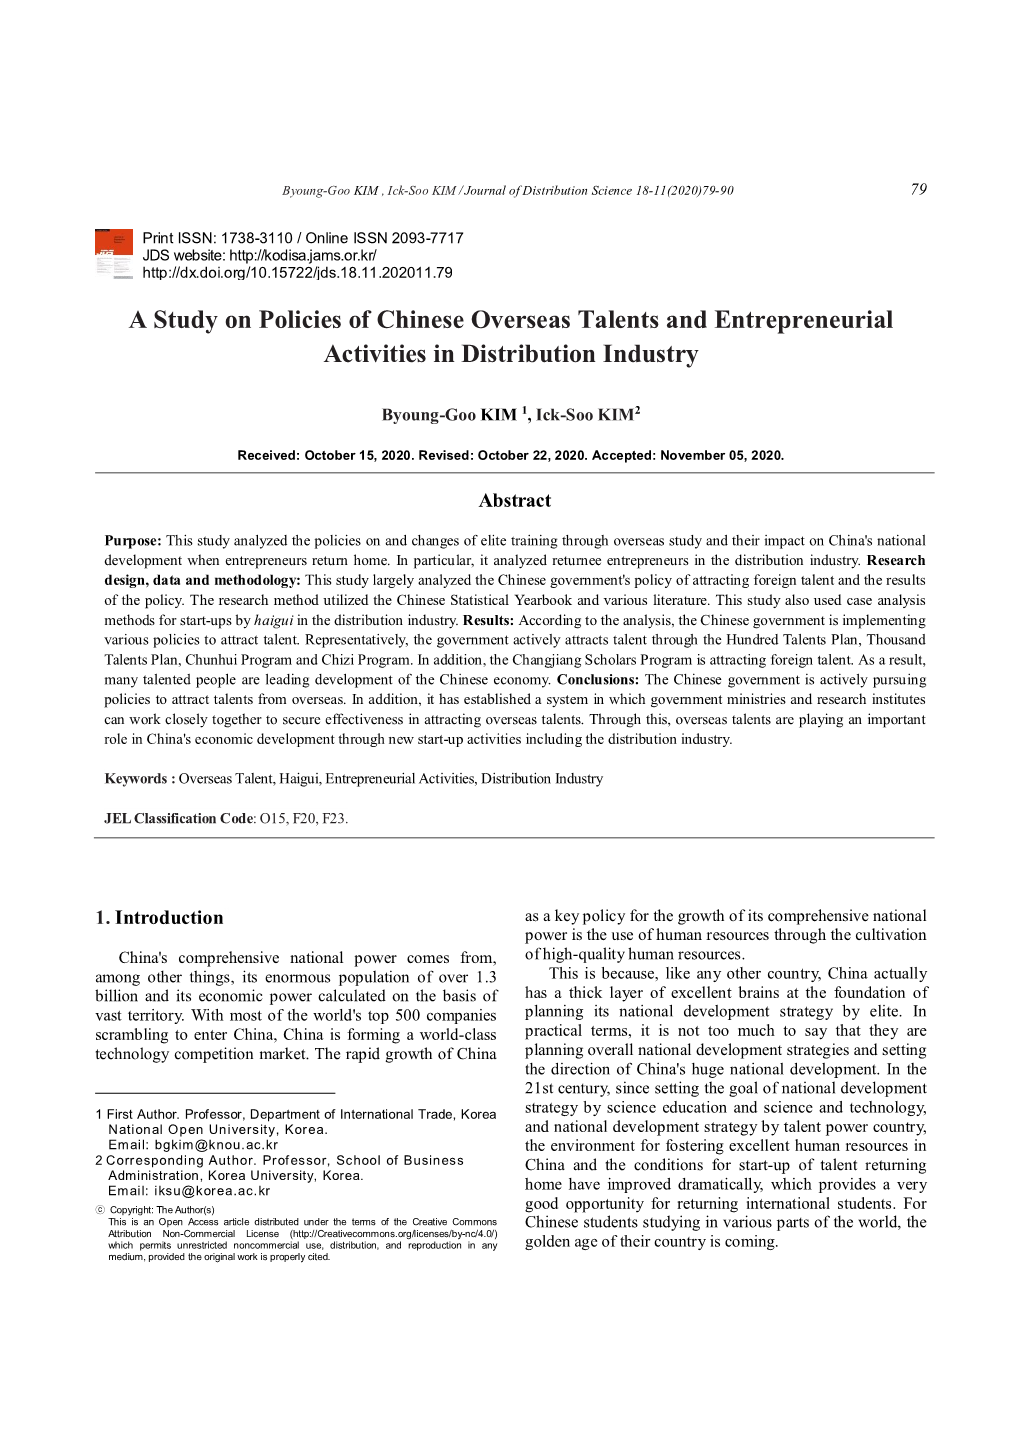 A Study on Policies of Chinese Overseas Talents and Entrepreneurial Activities in Distribution Industry